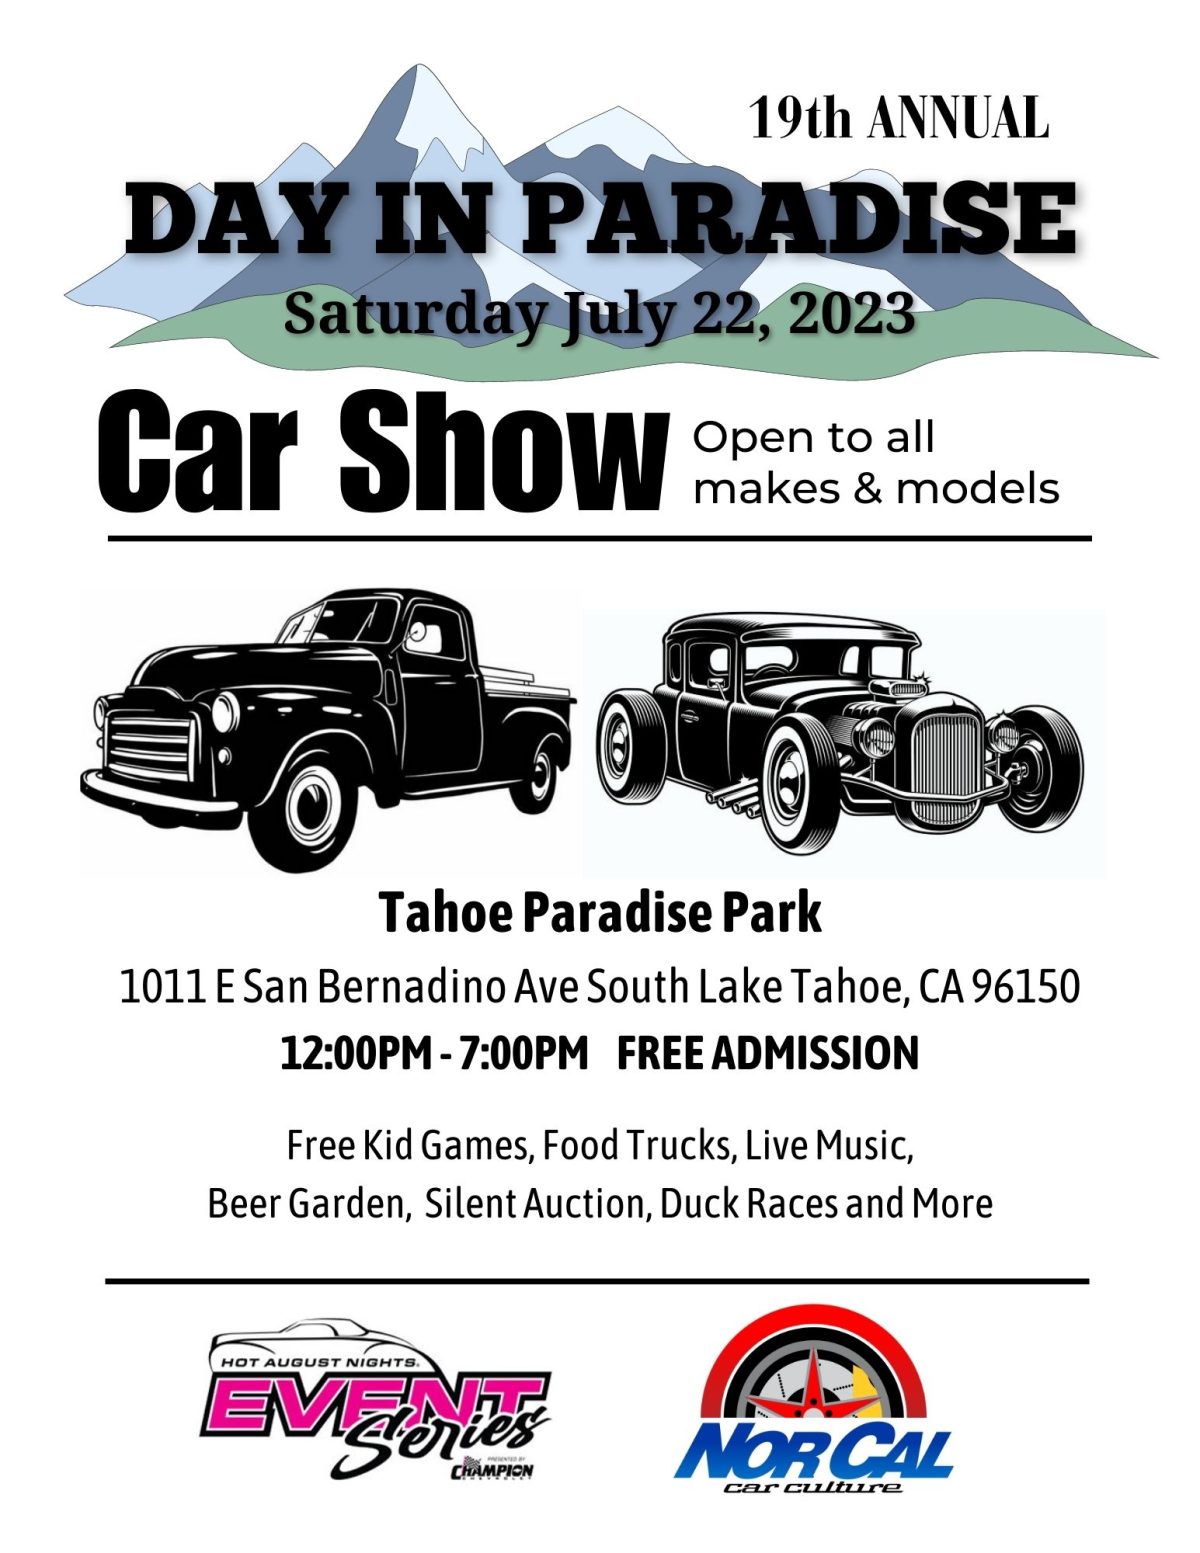 Day in Paradise Car Show